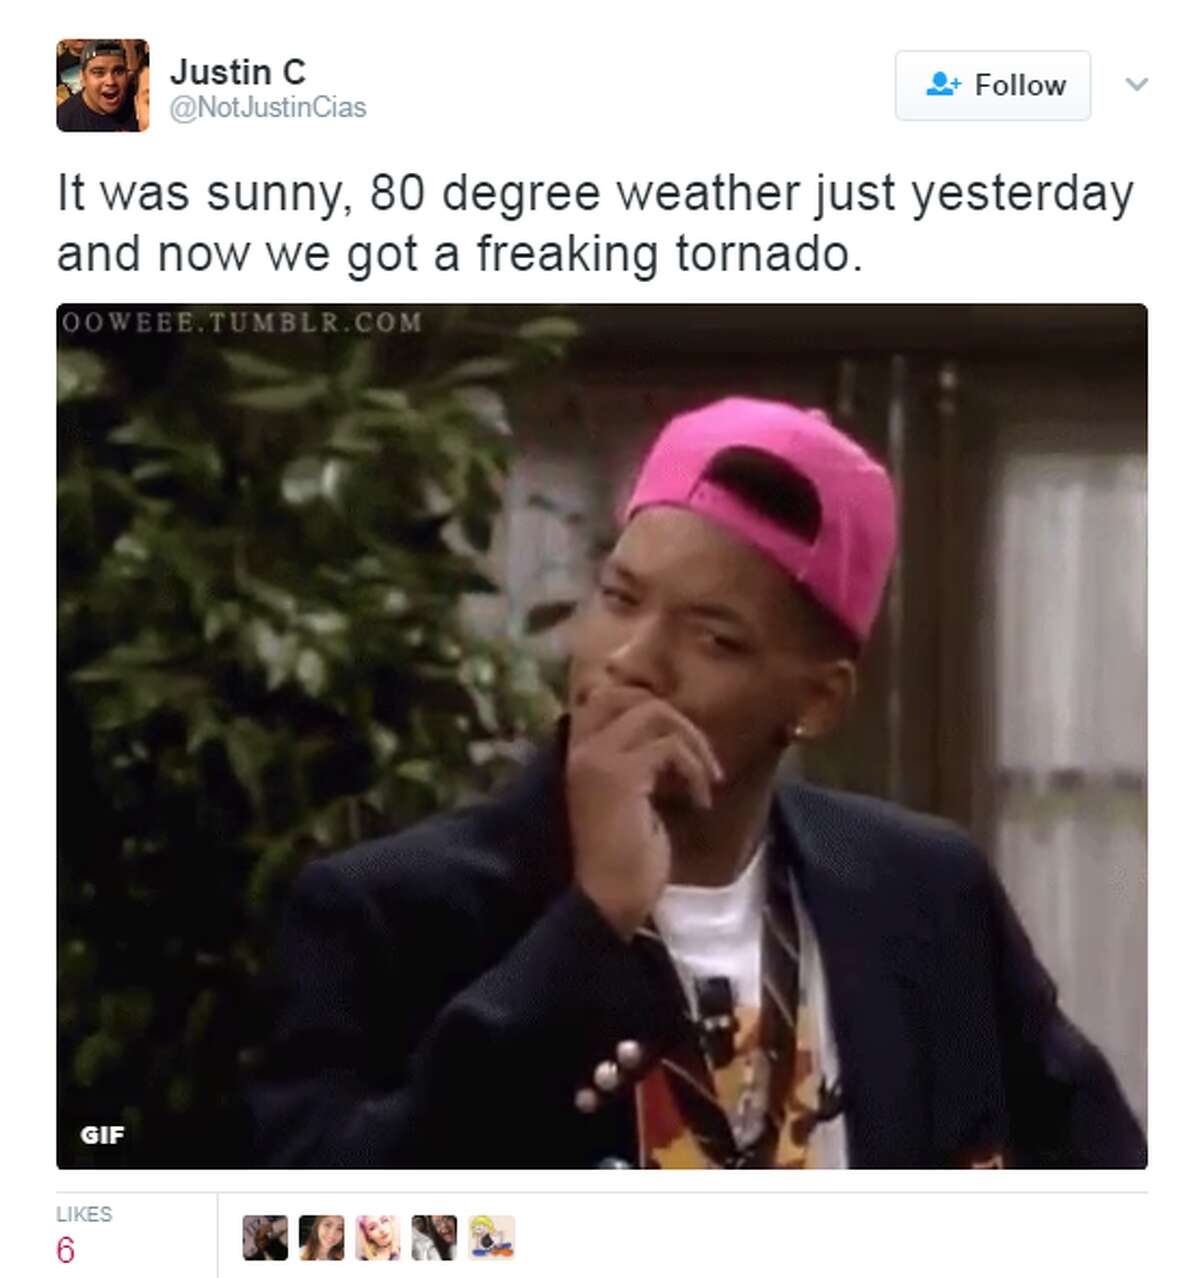 @NotJustinCias: It was sunny, 80 degree weather just yesterday and now we got a freaking tornado.